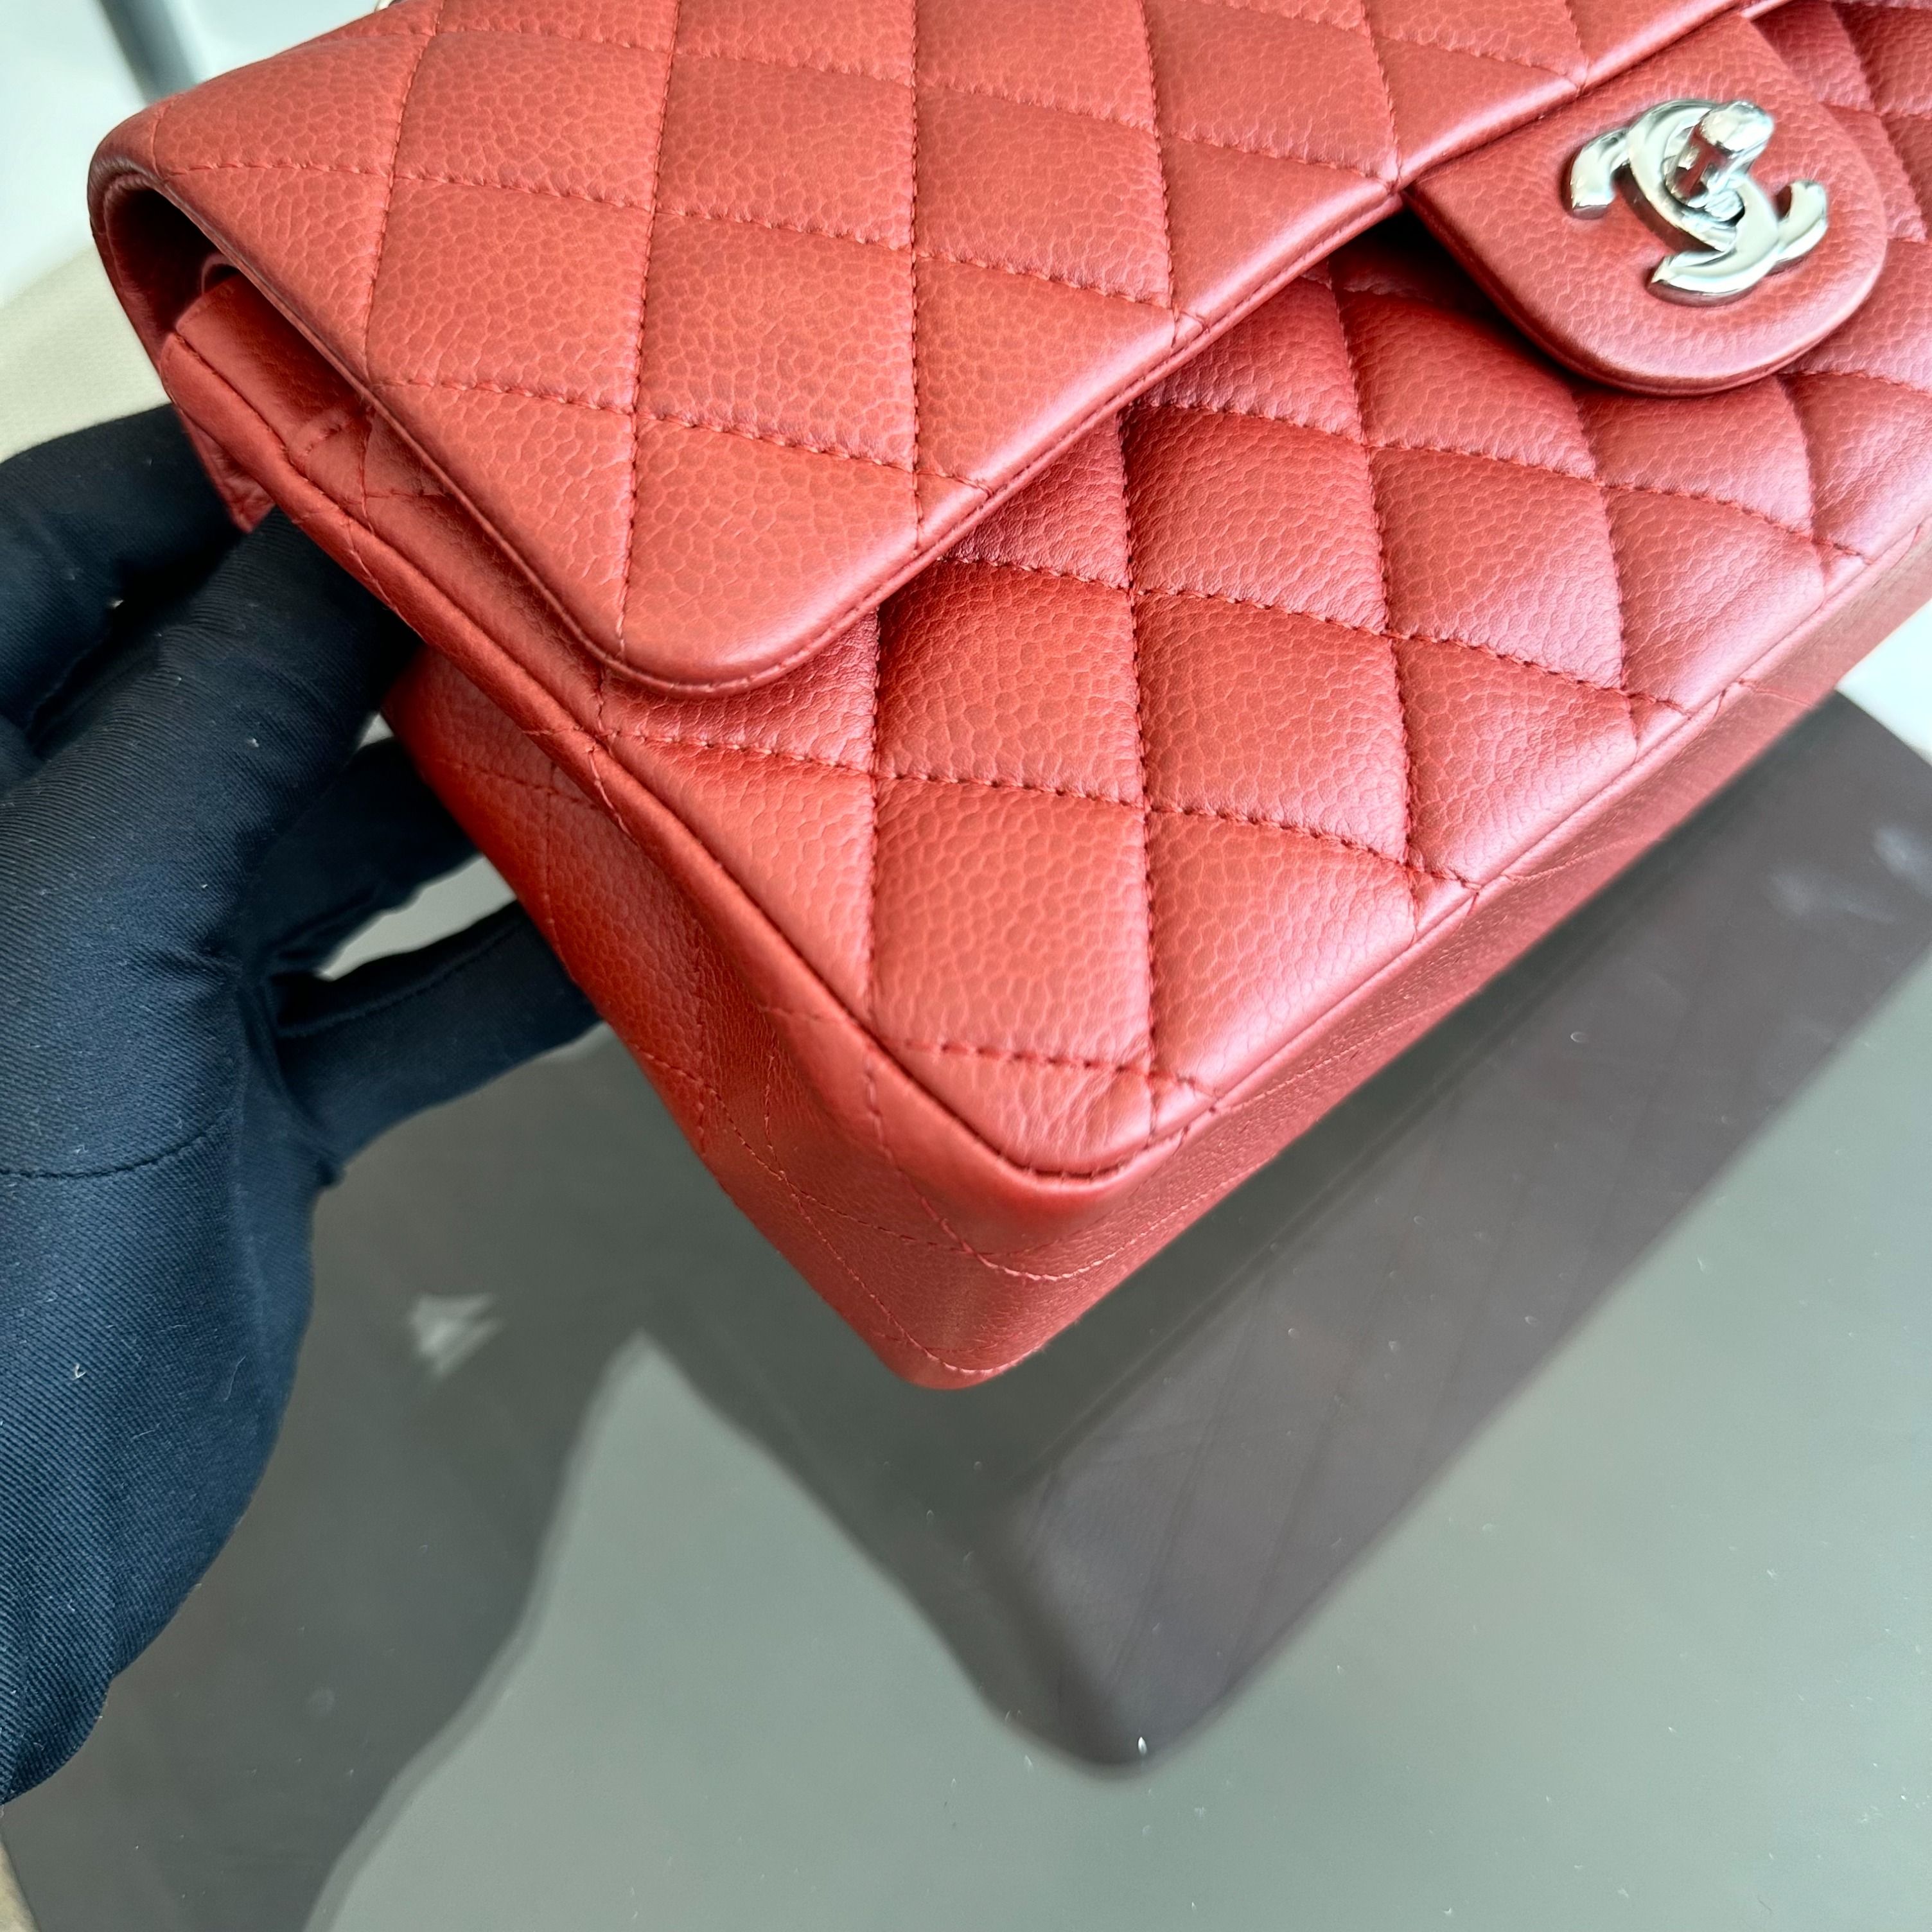 *Caviar* Chanel Caviar Medium Classic Flap 25CM Quilted Red SHW No 14